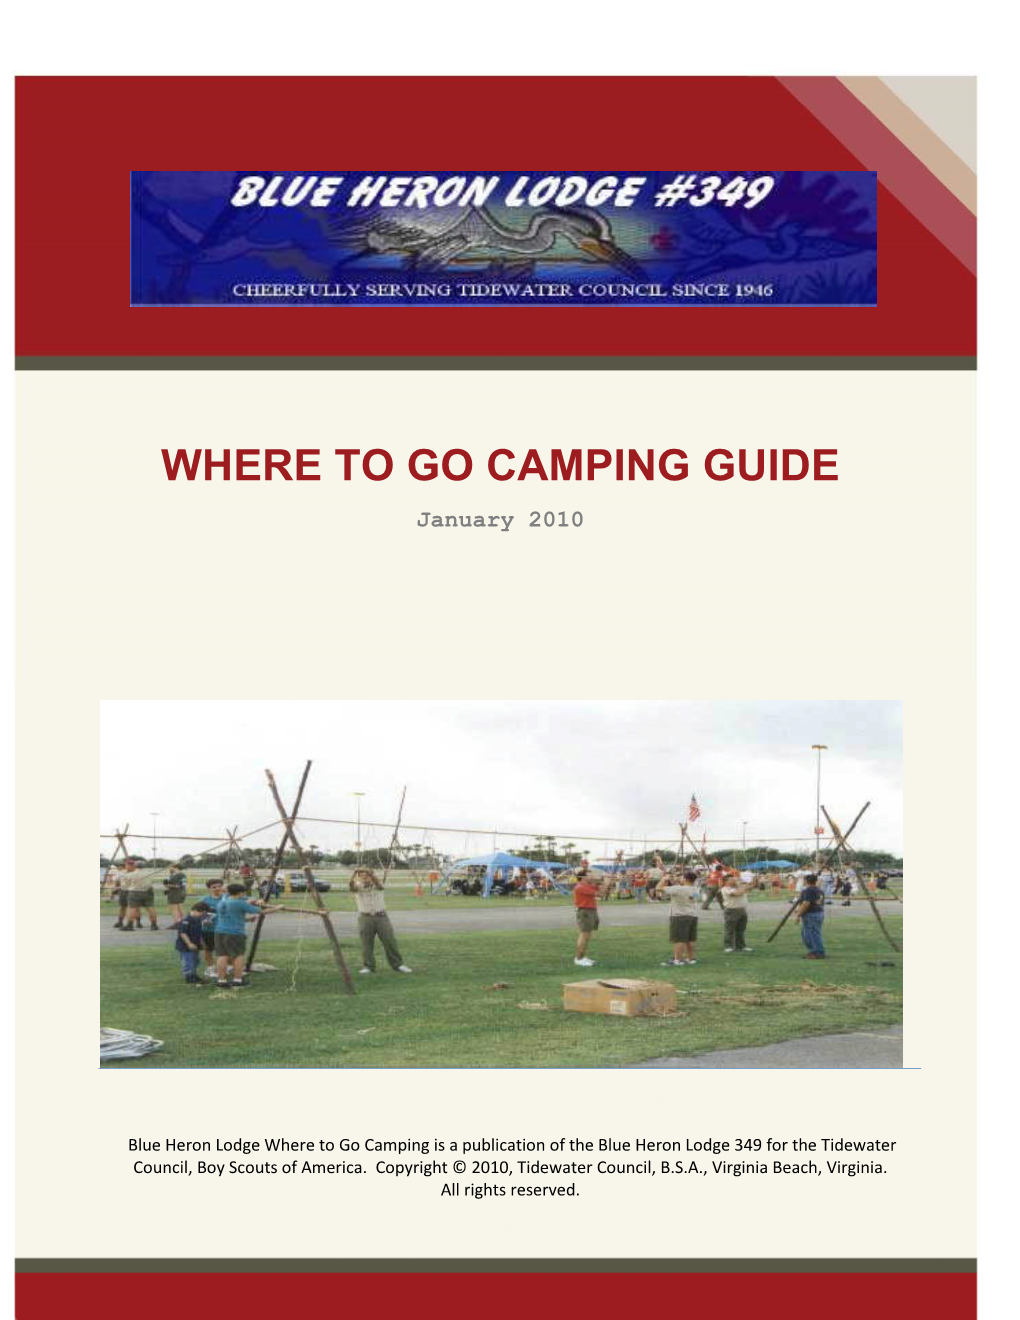 Where to Go Camping Guide”